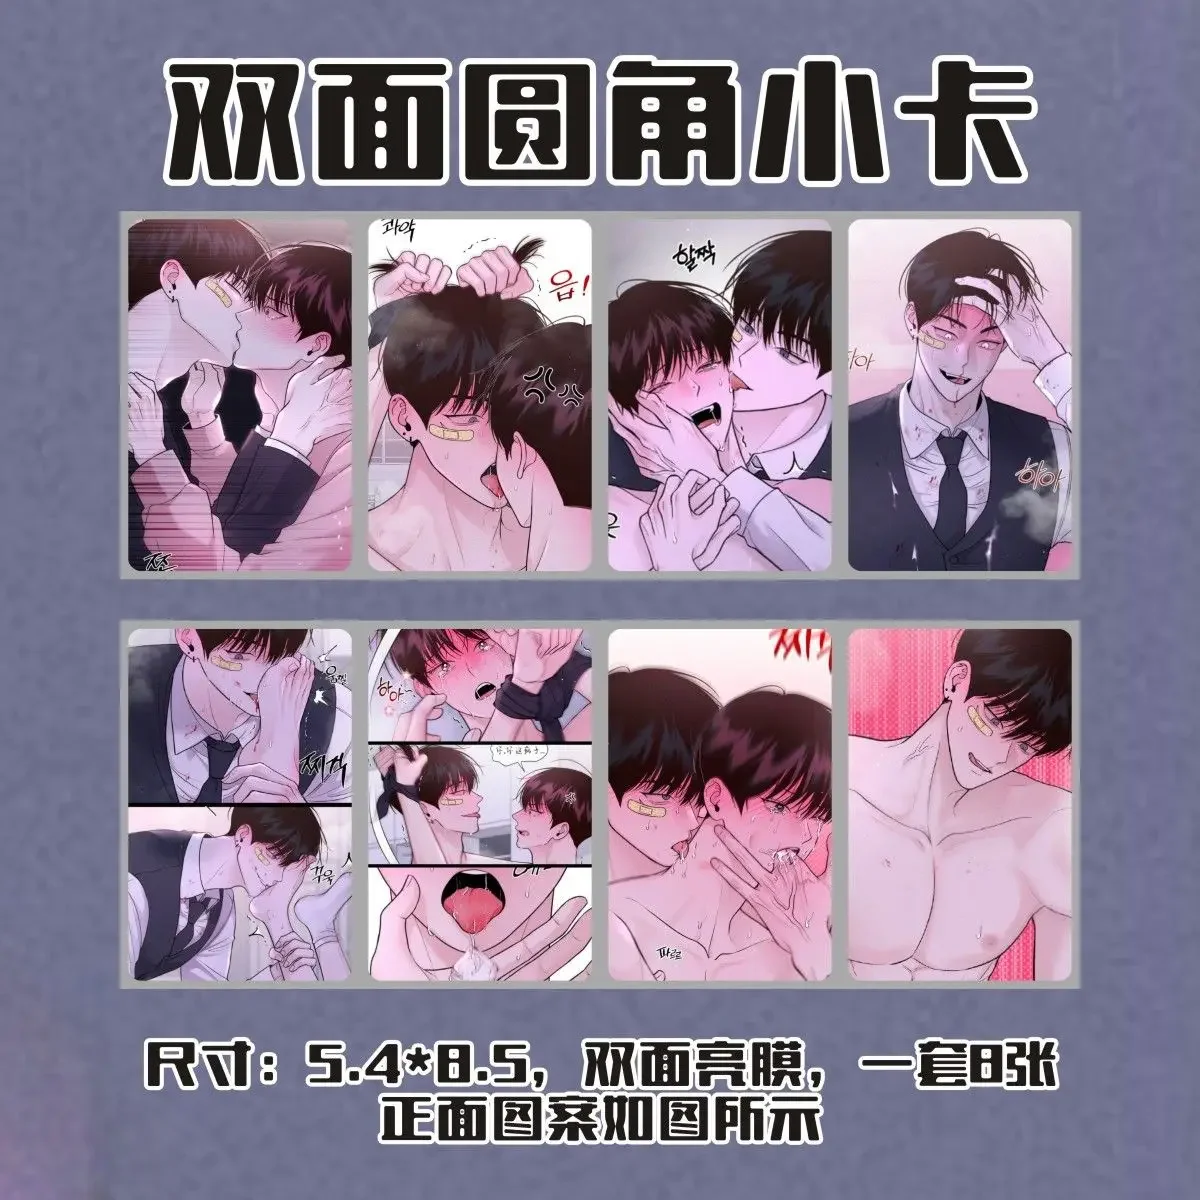 Korean BL Manwha The Pawns Revenge 3 Inches Card Bookmark Jeoh Seong Rok  Book Clip Pagination Mark Cards Collection Manga Goods - AliExpress